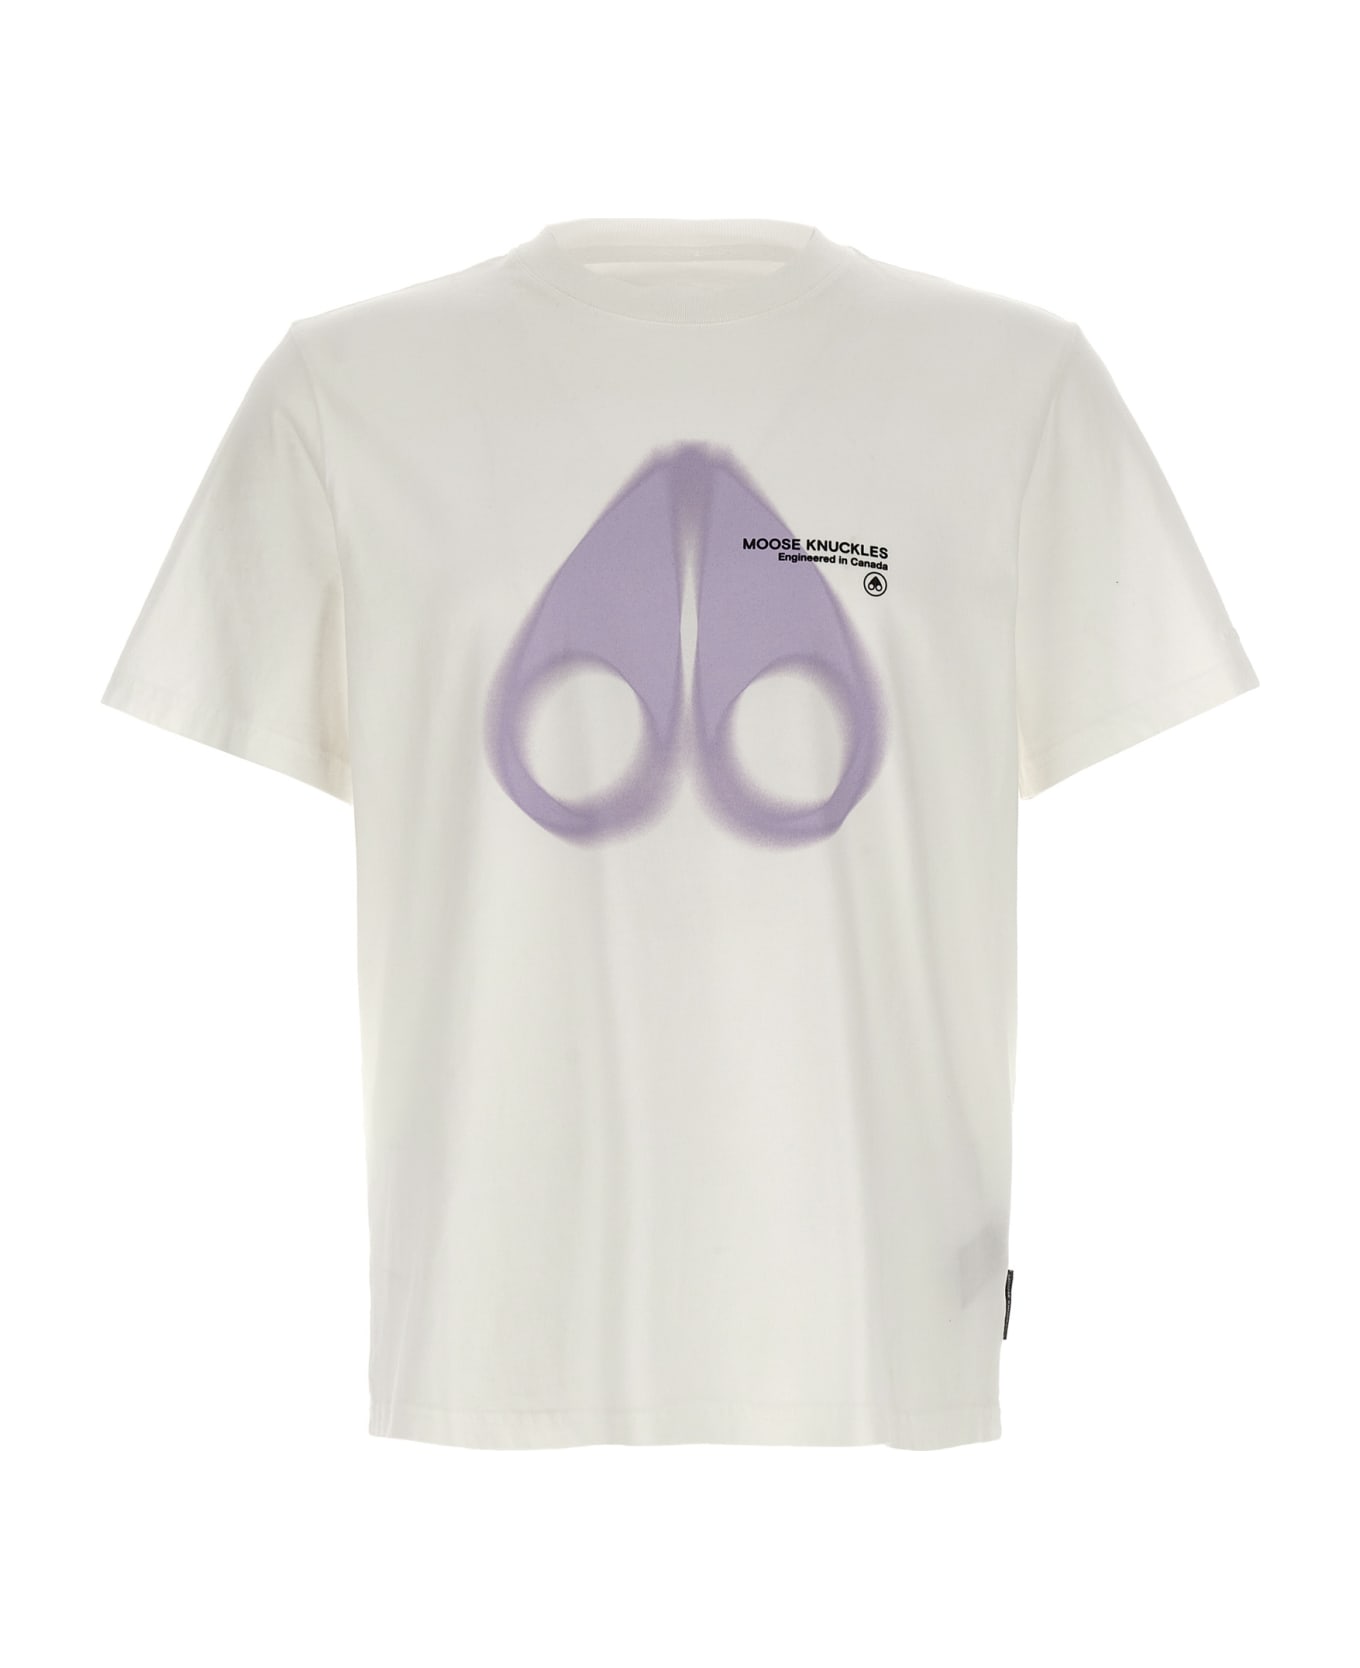 Moose Knuckles 'maurice' T-shirt - White シャツ